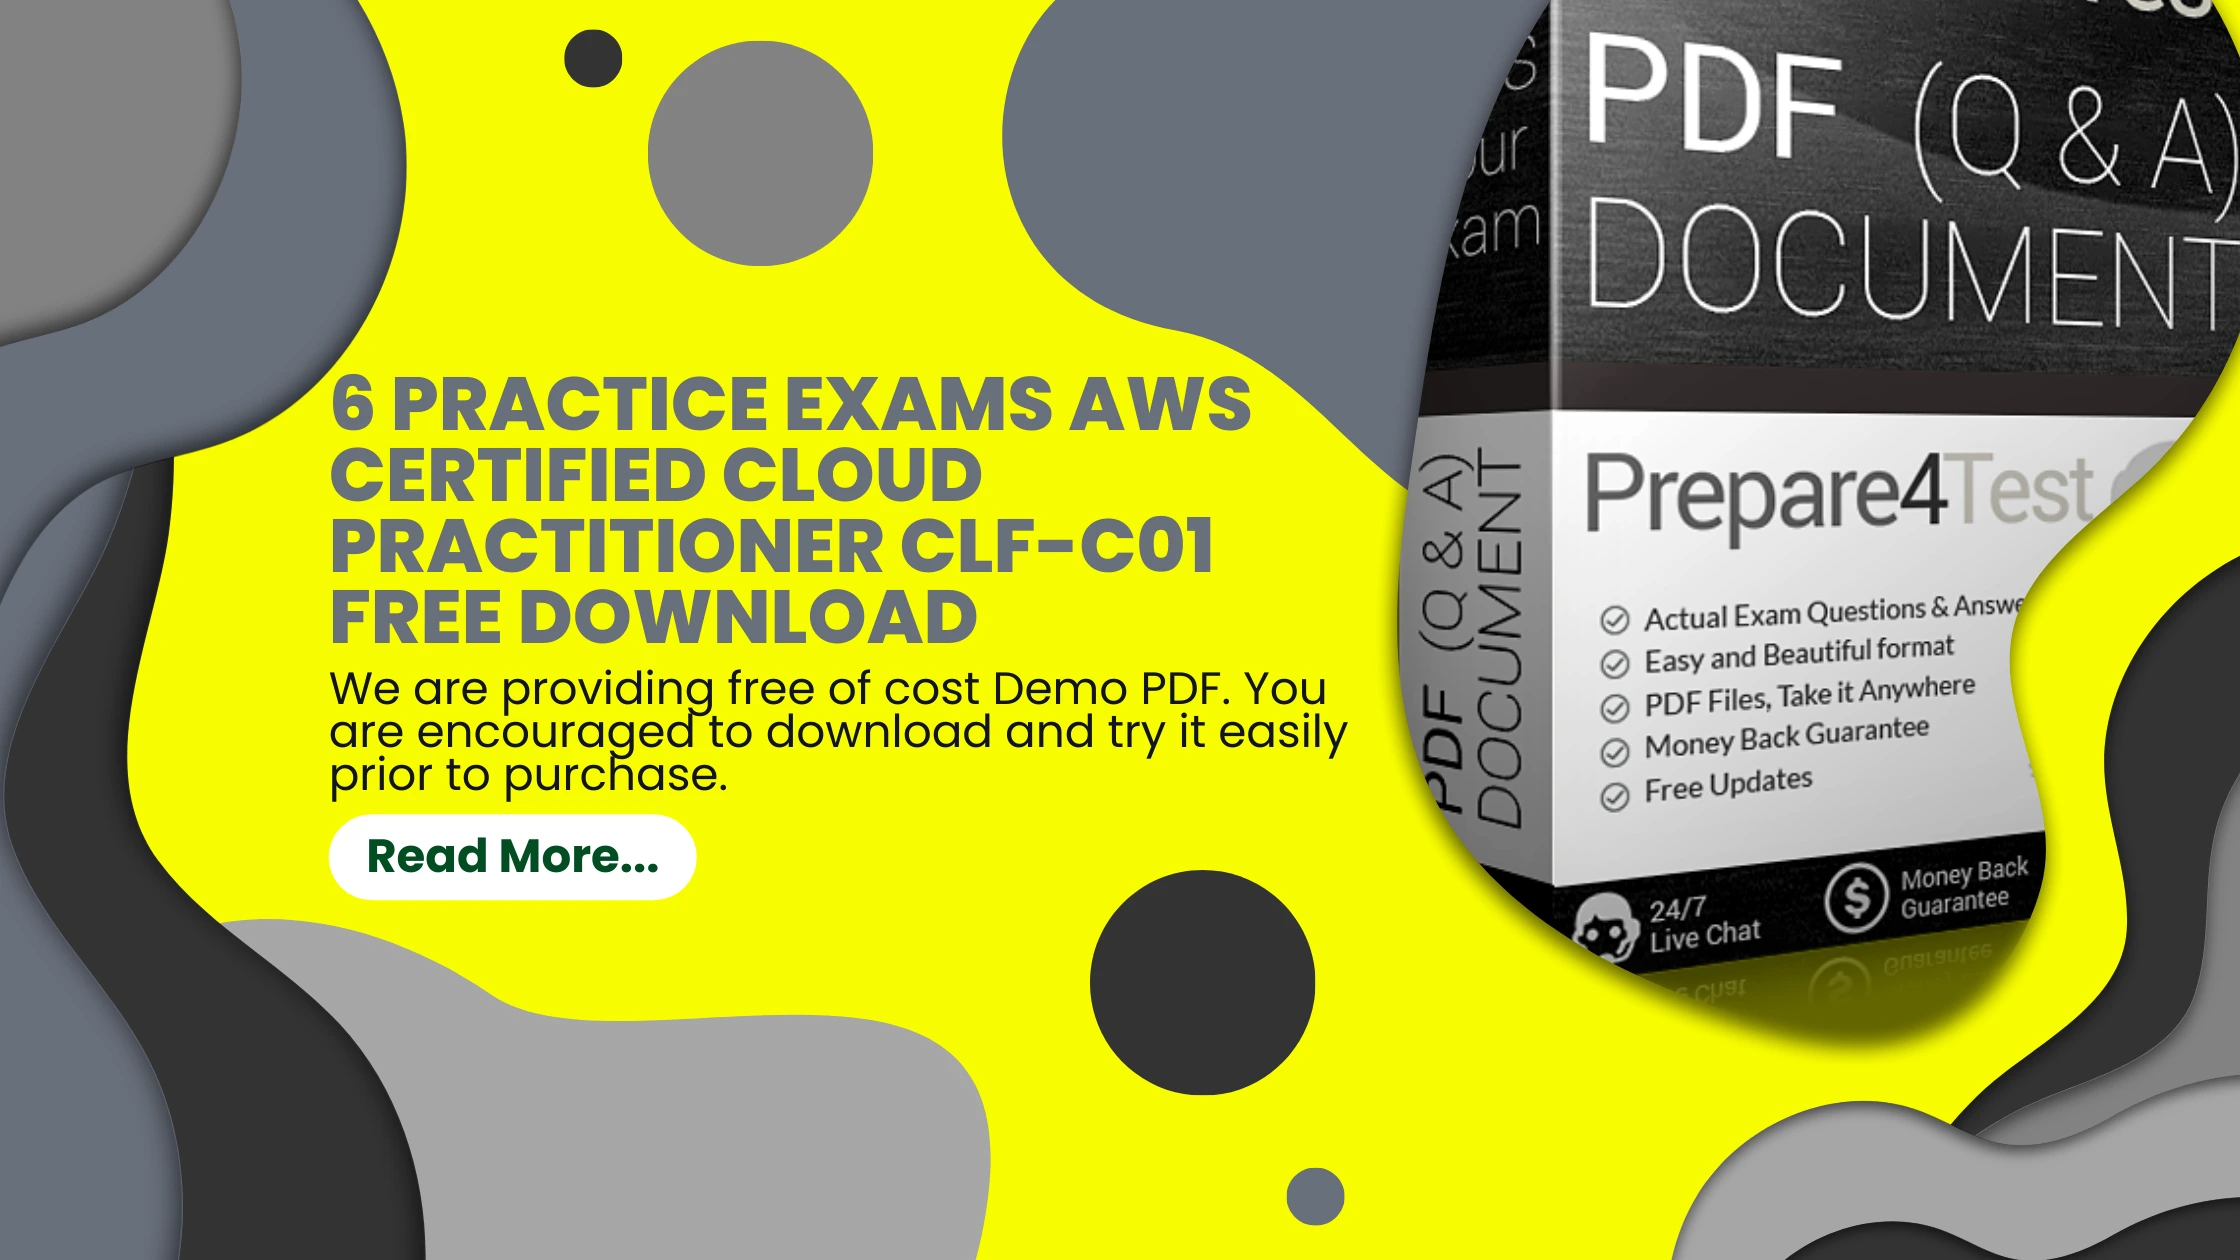 6 Practice Exams AWS Certified Cloud Practitioner CLF-C01 Free Download promotion